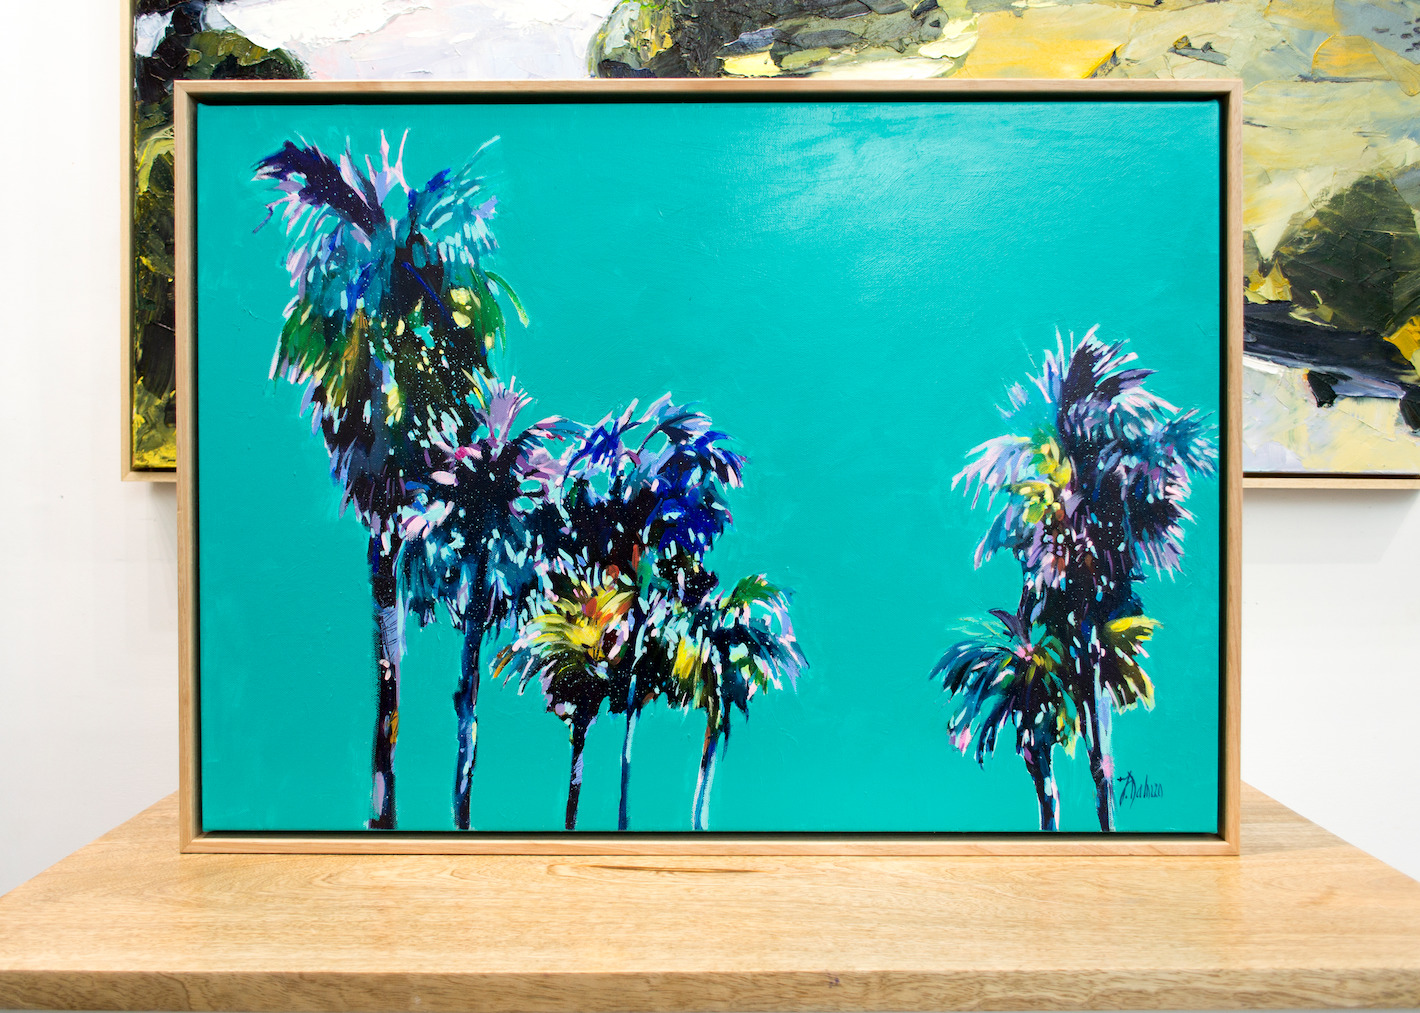 Framed Front View Of Landscape Painting "Sanctuary Palms Azure" By Judith Dalozzo